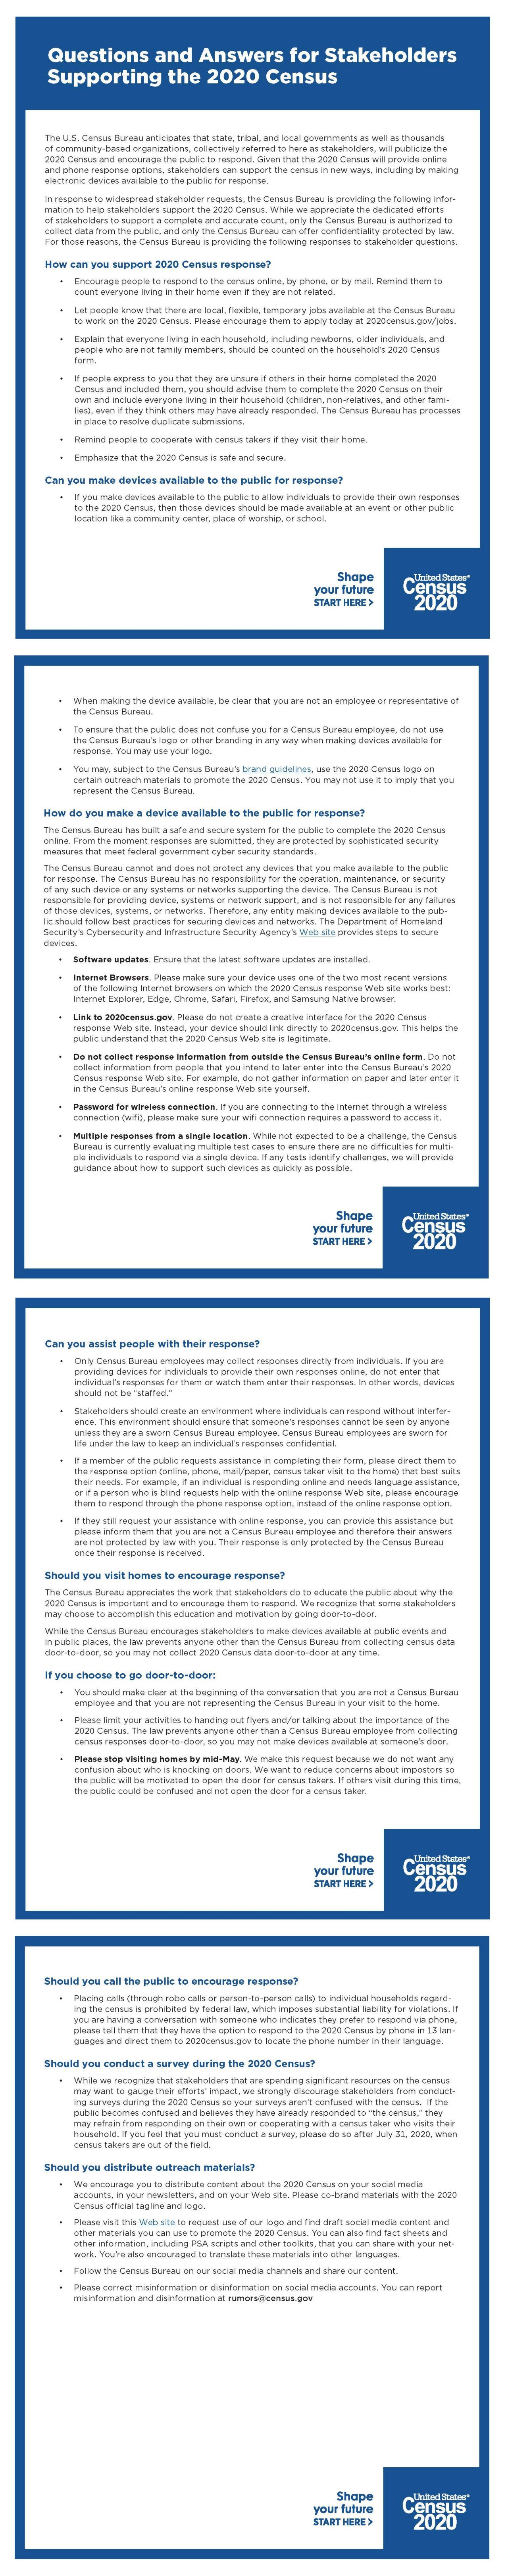 Fact Sheet: Questions and Answers for Stakeholders Supporting the 2020 Census